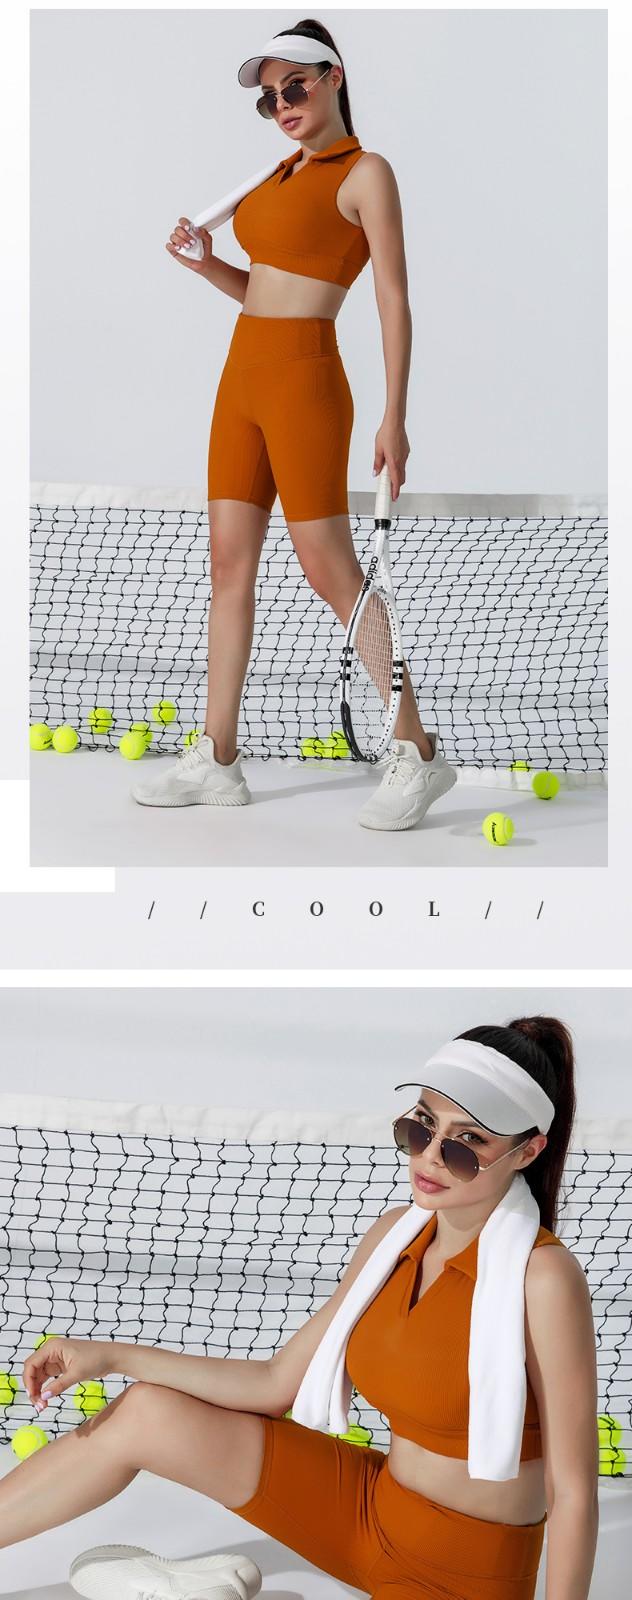 INGOR soft women's tennis outfits owner for ladies